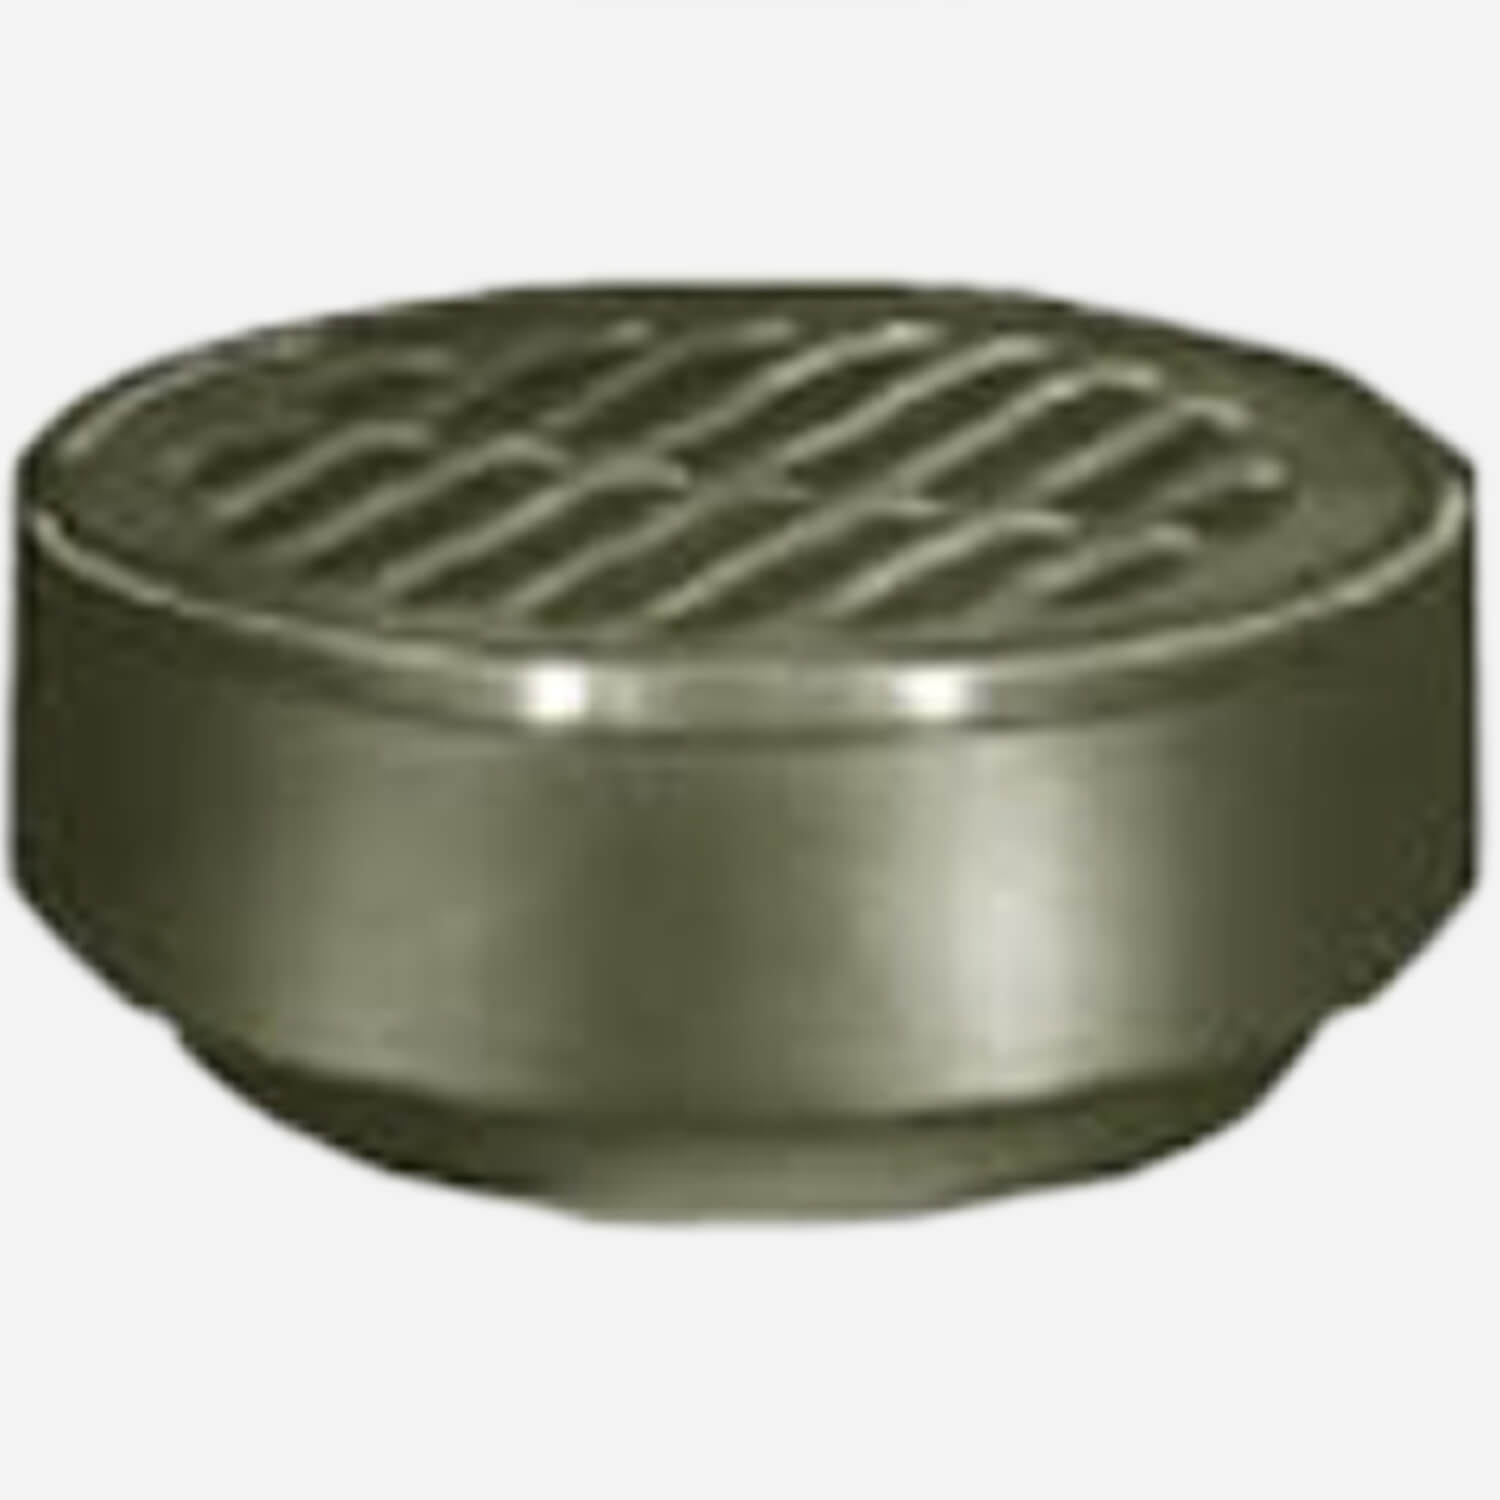 Adj. Shower Drain With S.S. Top – Law Supply, Inc.